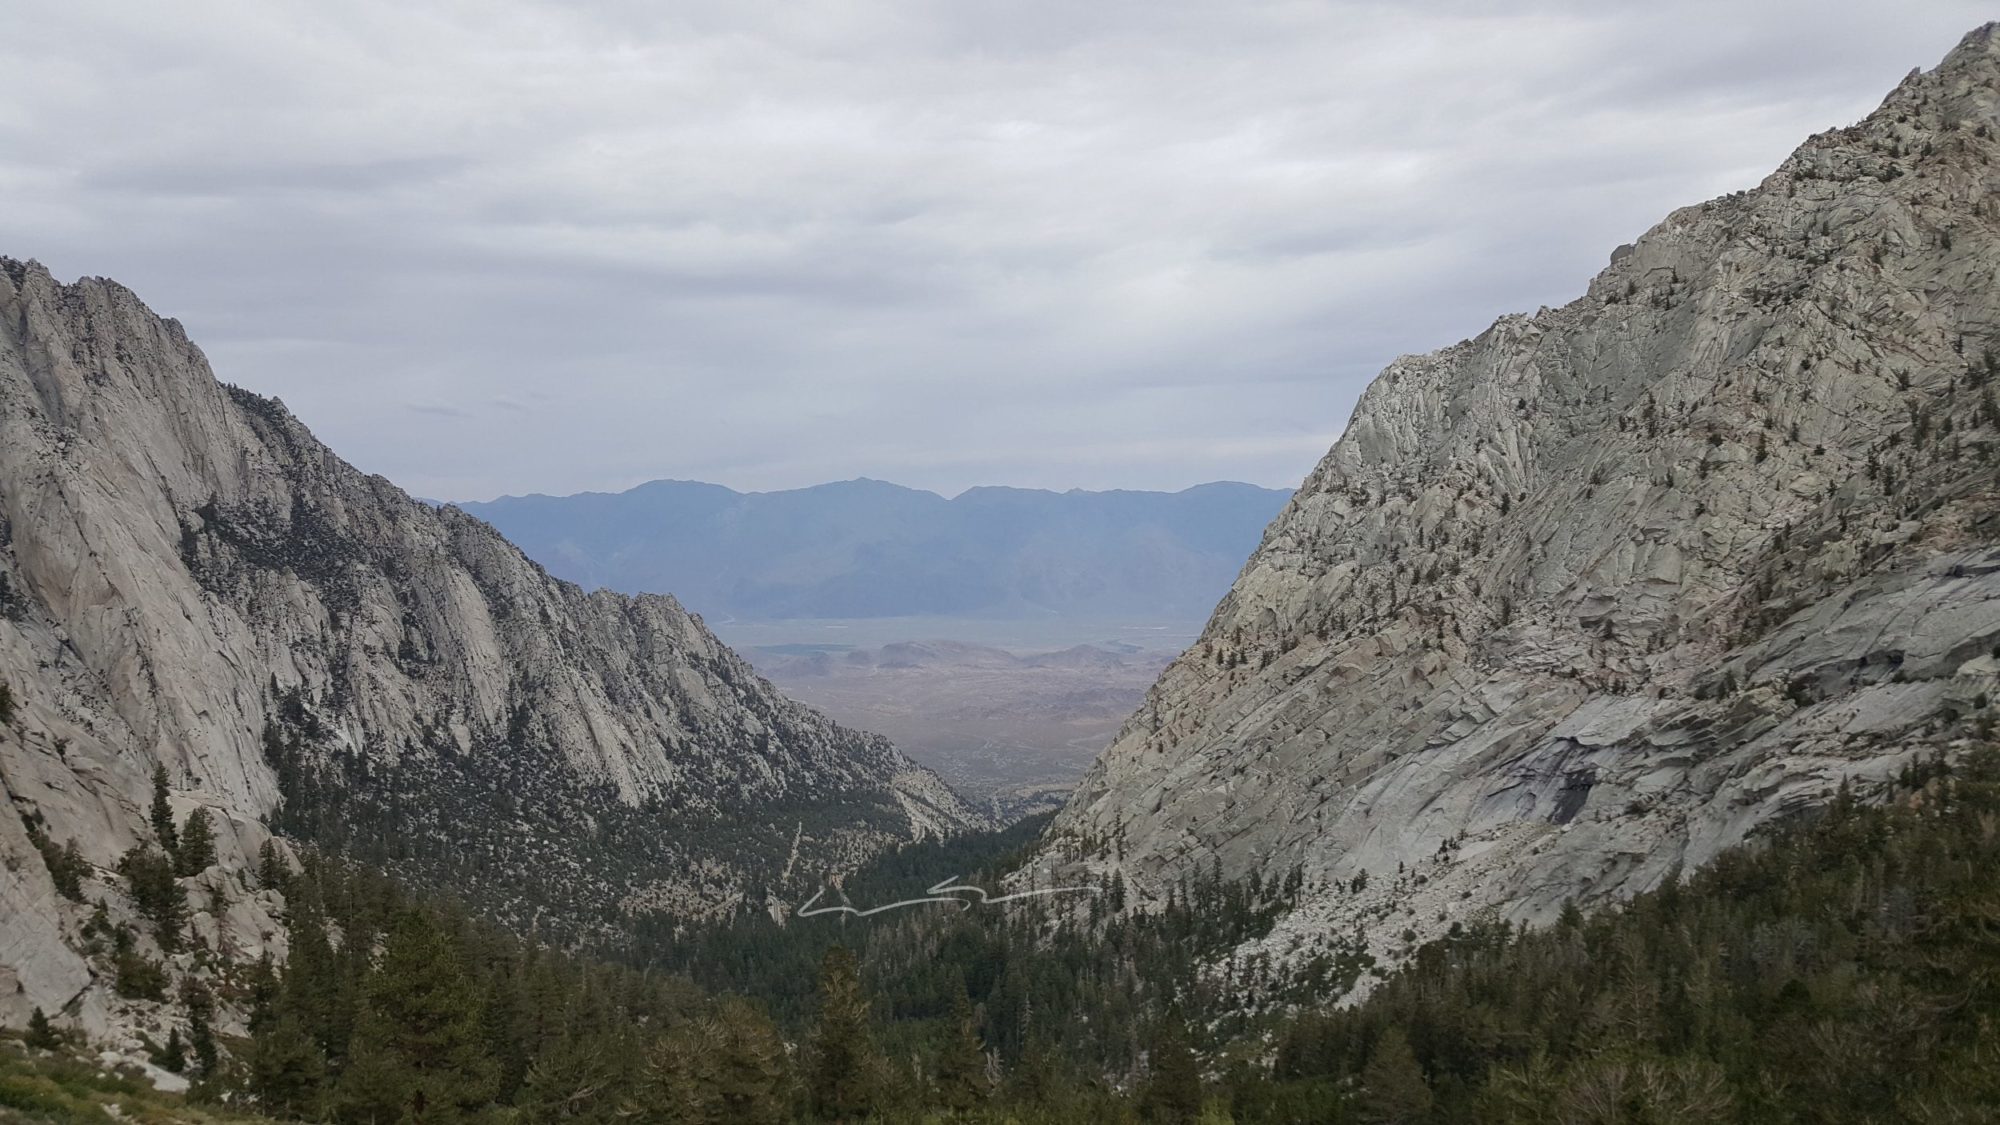 looking back down the valley towards whitney portal